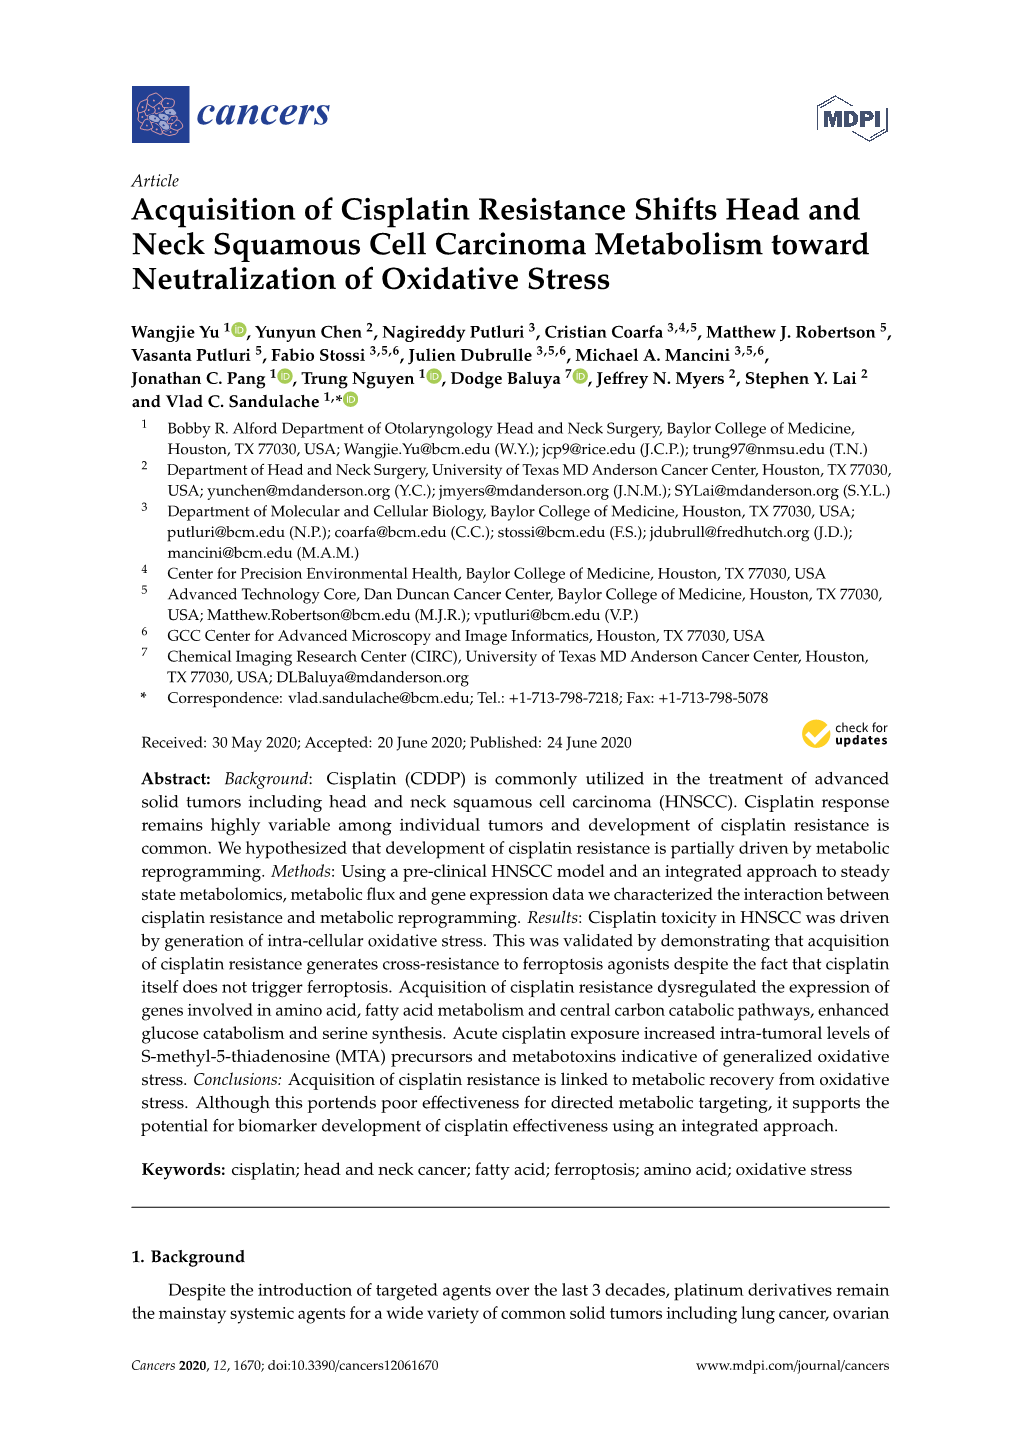 Acquisition of Cisplatin Resistance Shifts Head and Neck Squamous Cell Carcinoma Metabolism Toward Neutralization of Oxidative Stress